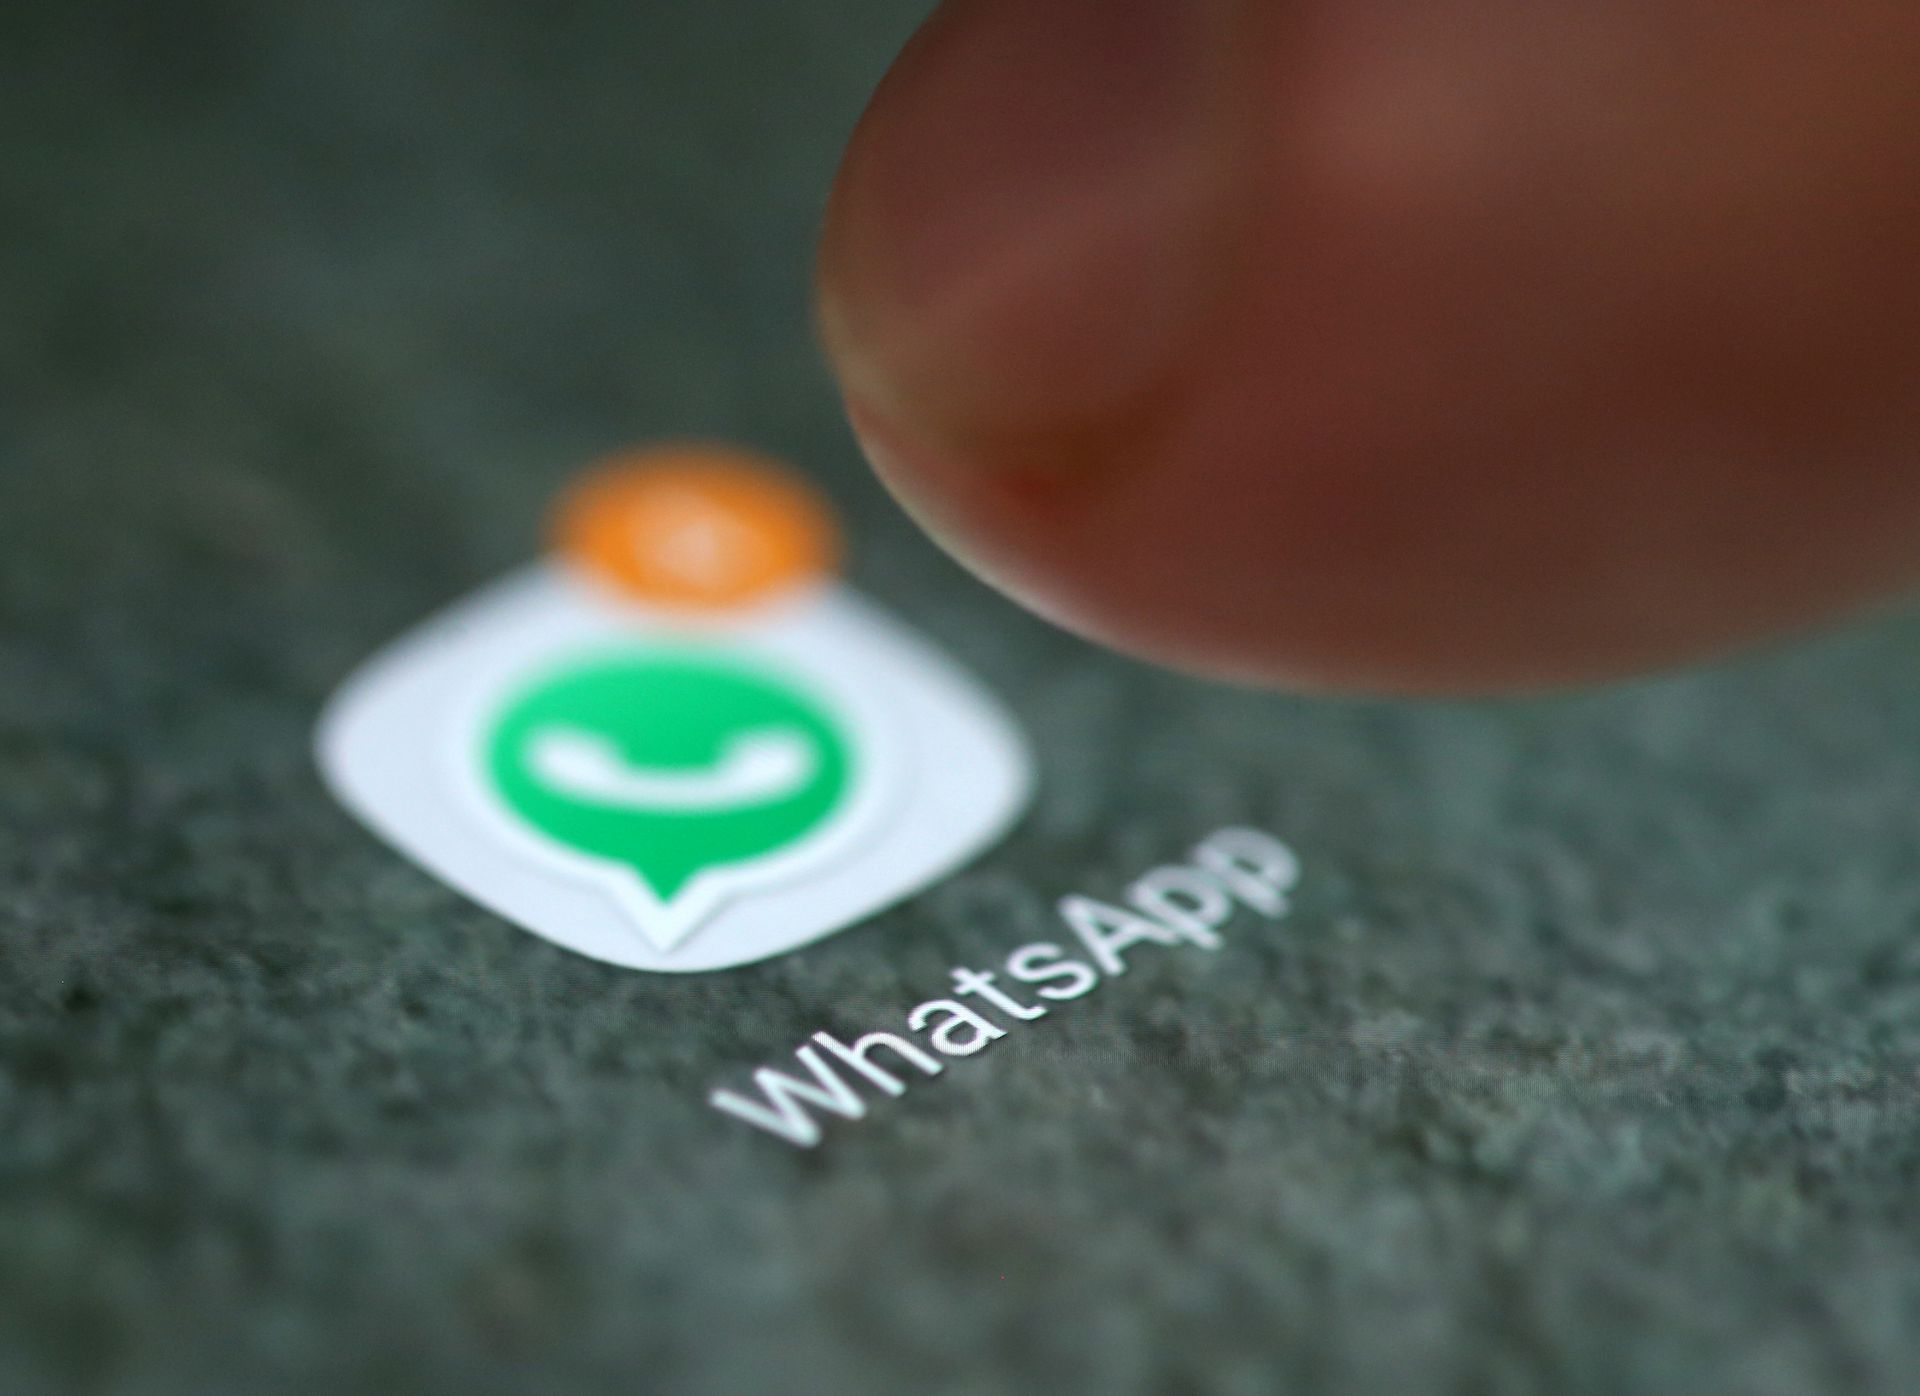 Turkey Accused of Using Probes to Collect Data from WhatsApp